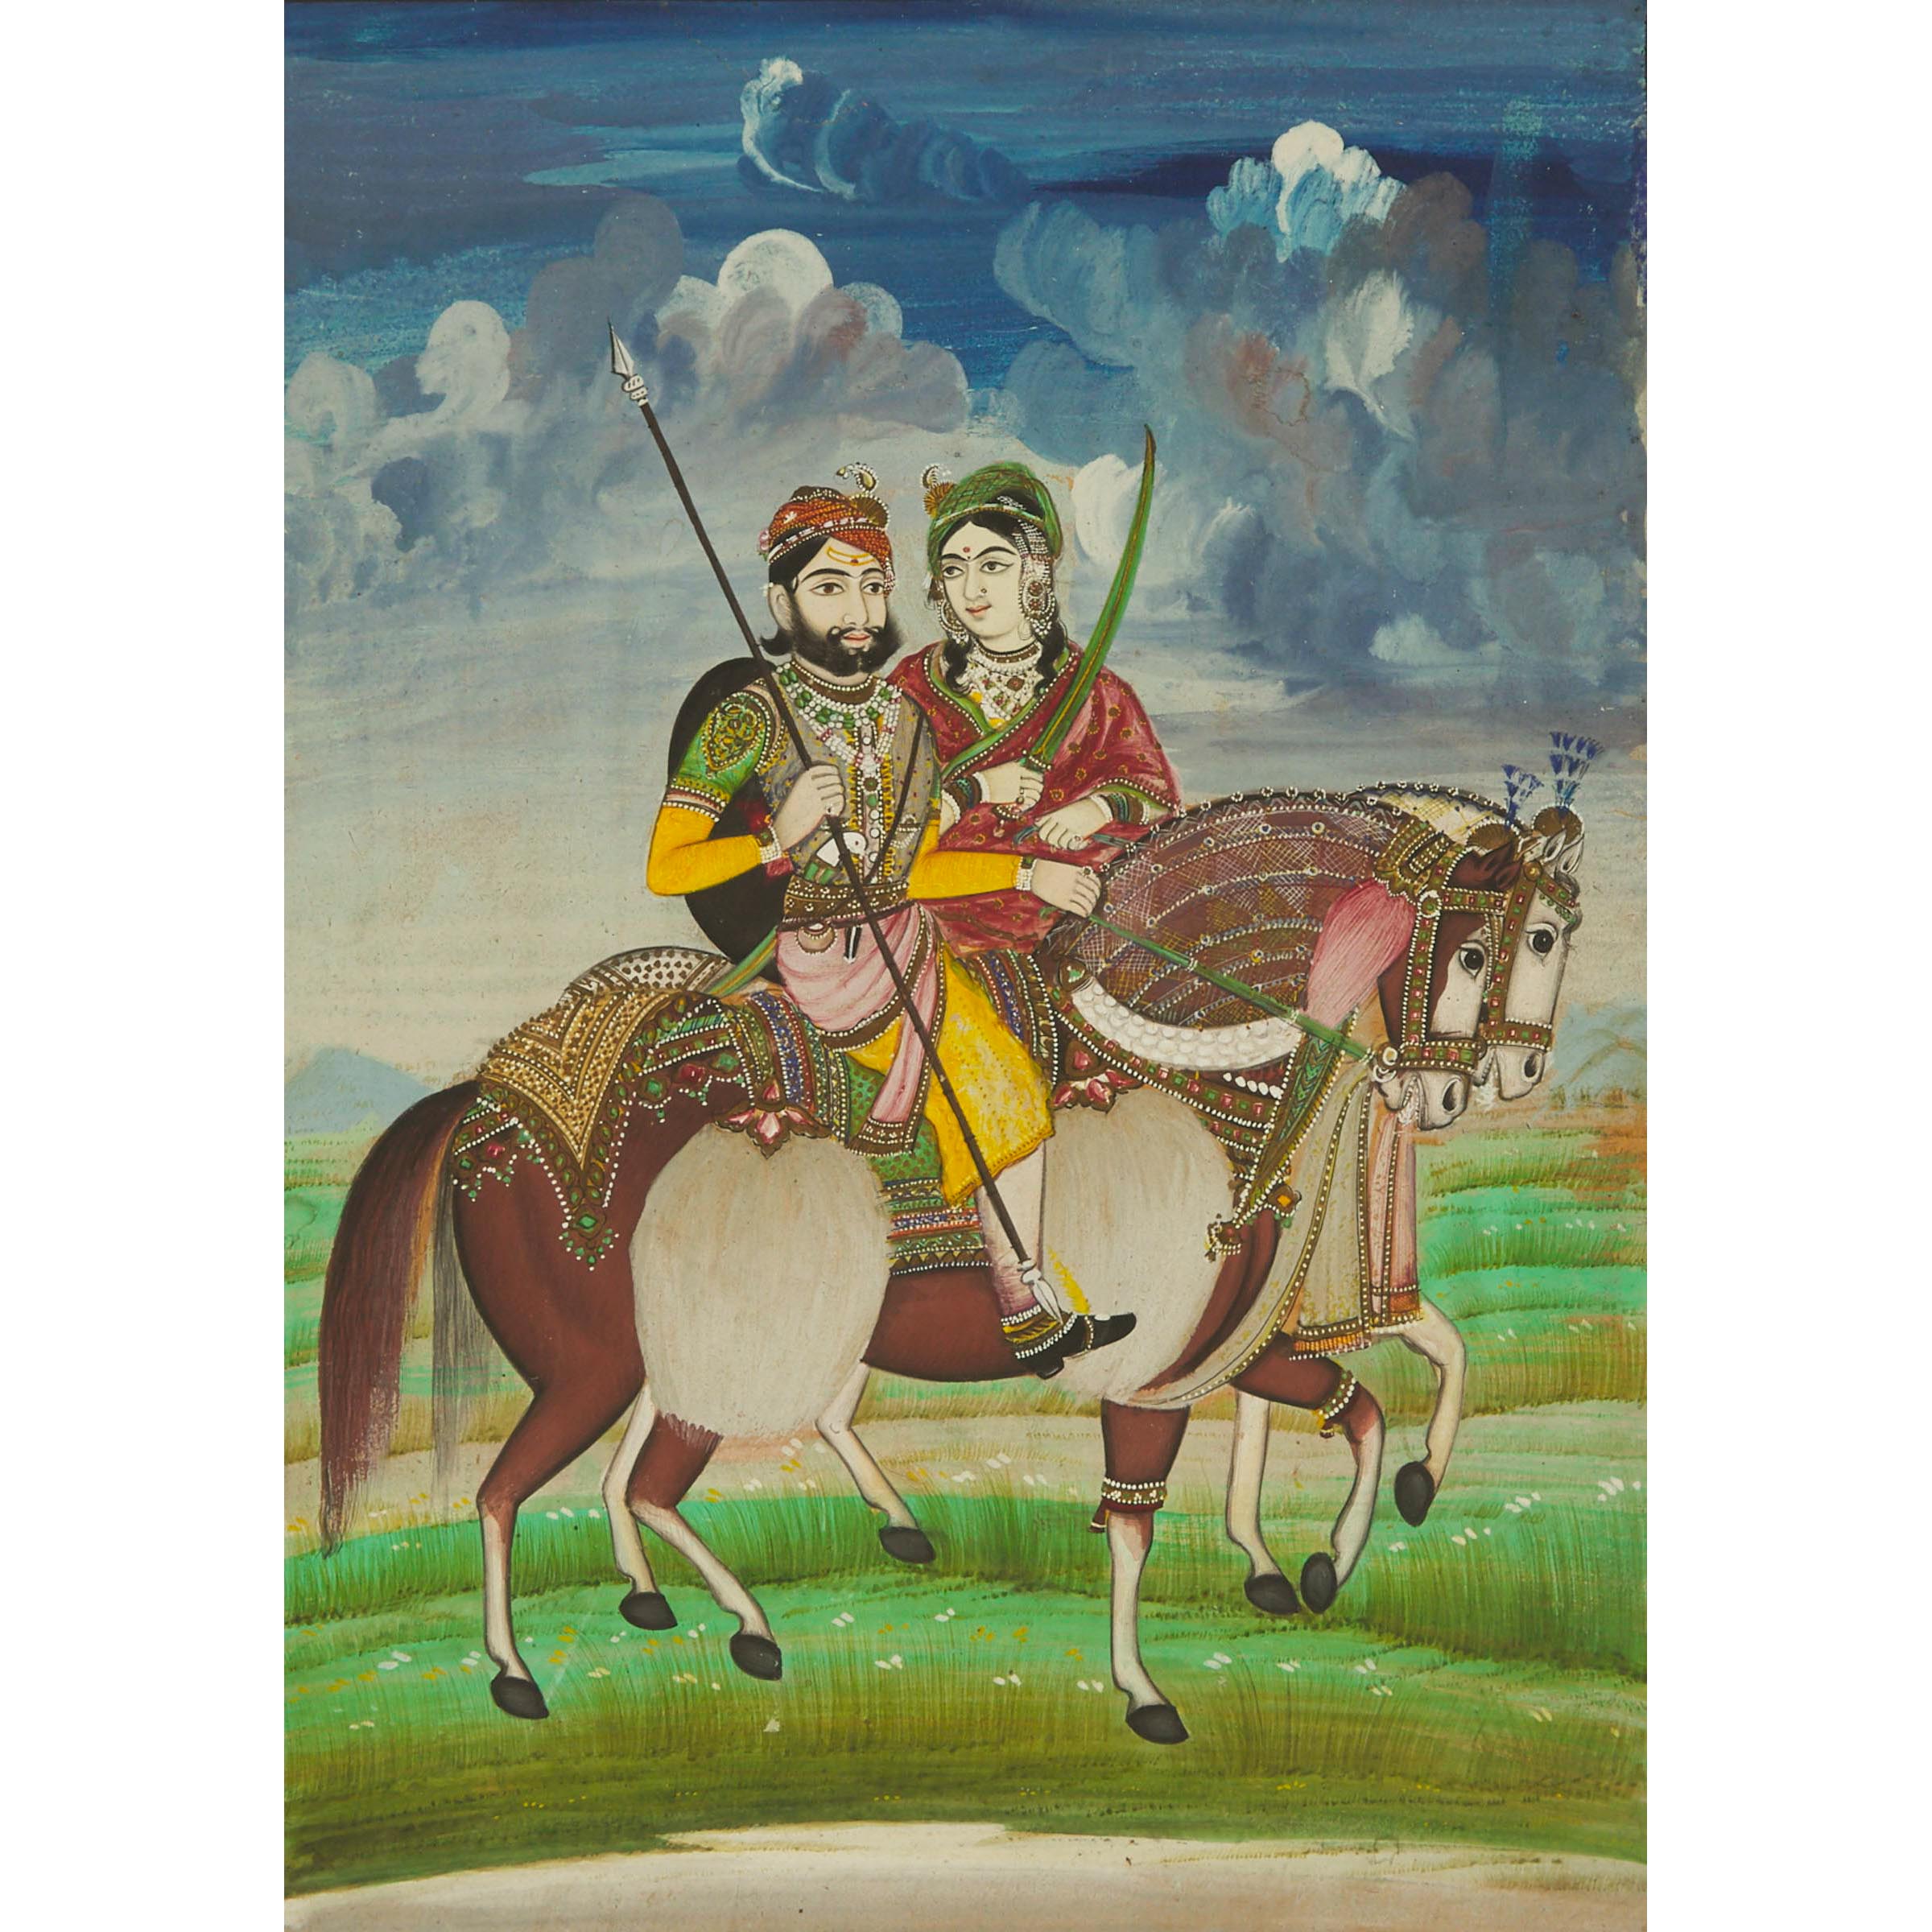 An Equestrian Portrait of Maharaja Ram Singh II of Jaipur (1835-1880) and Consort, Late 19th Century